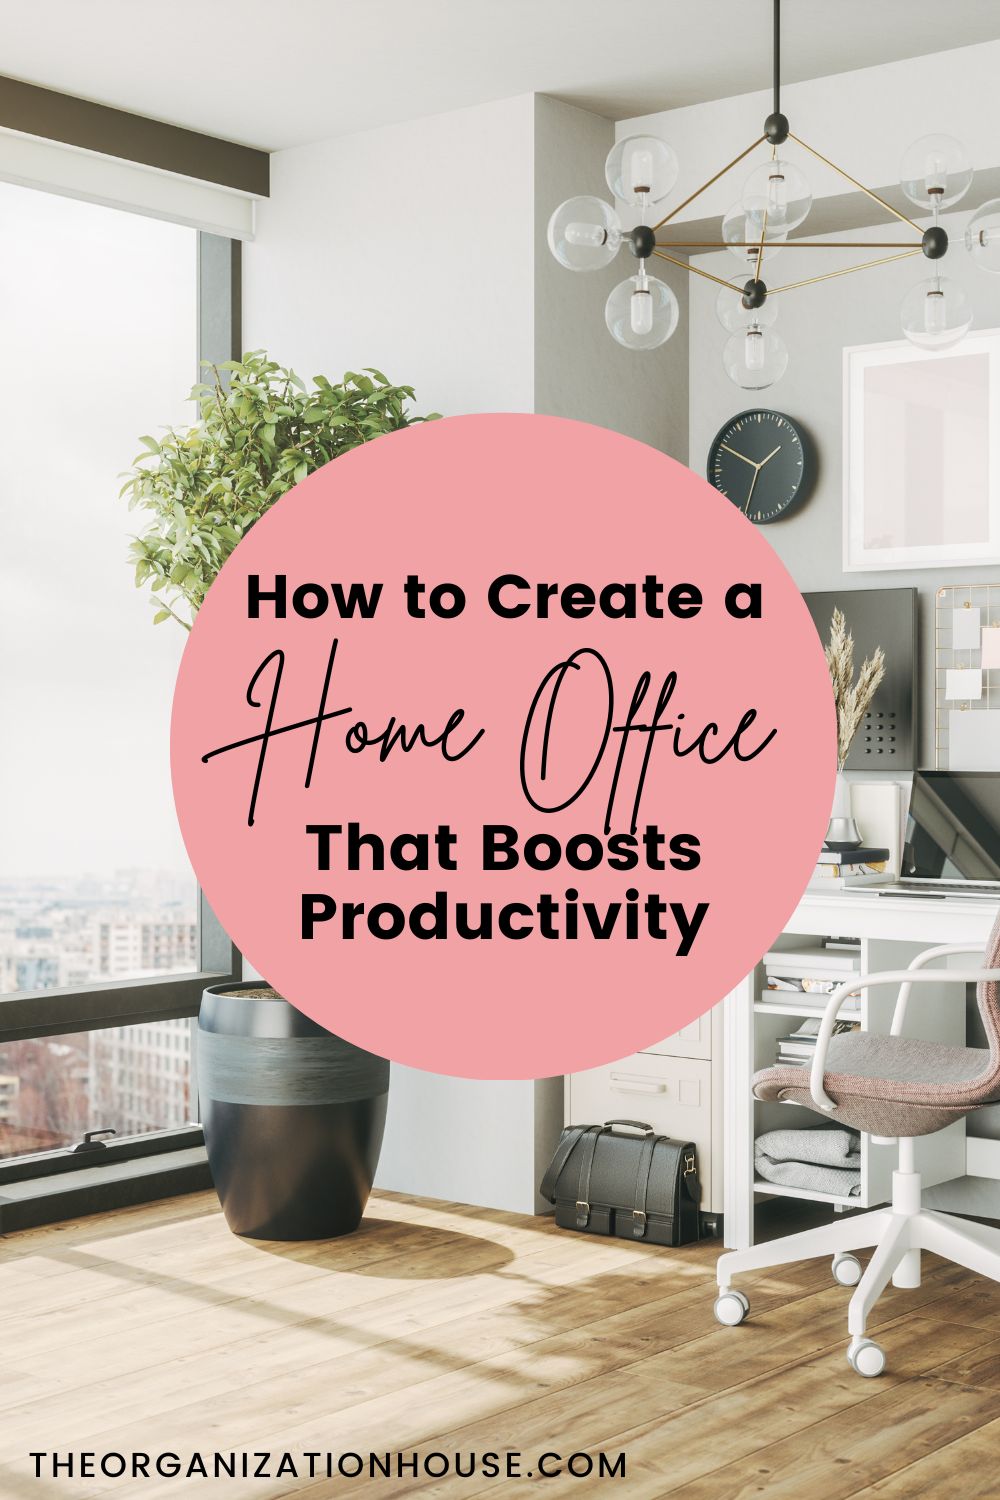 How to Create a Home Office that Boosts Productivity